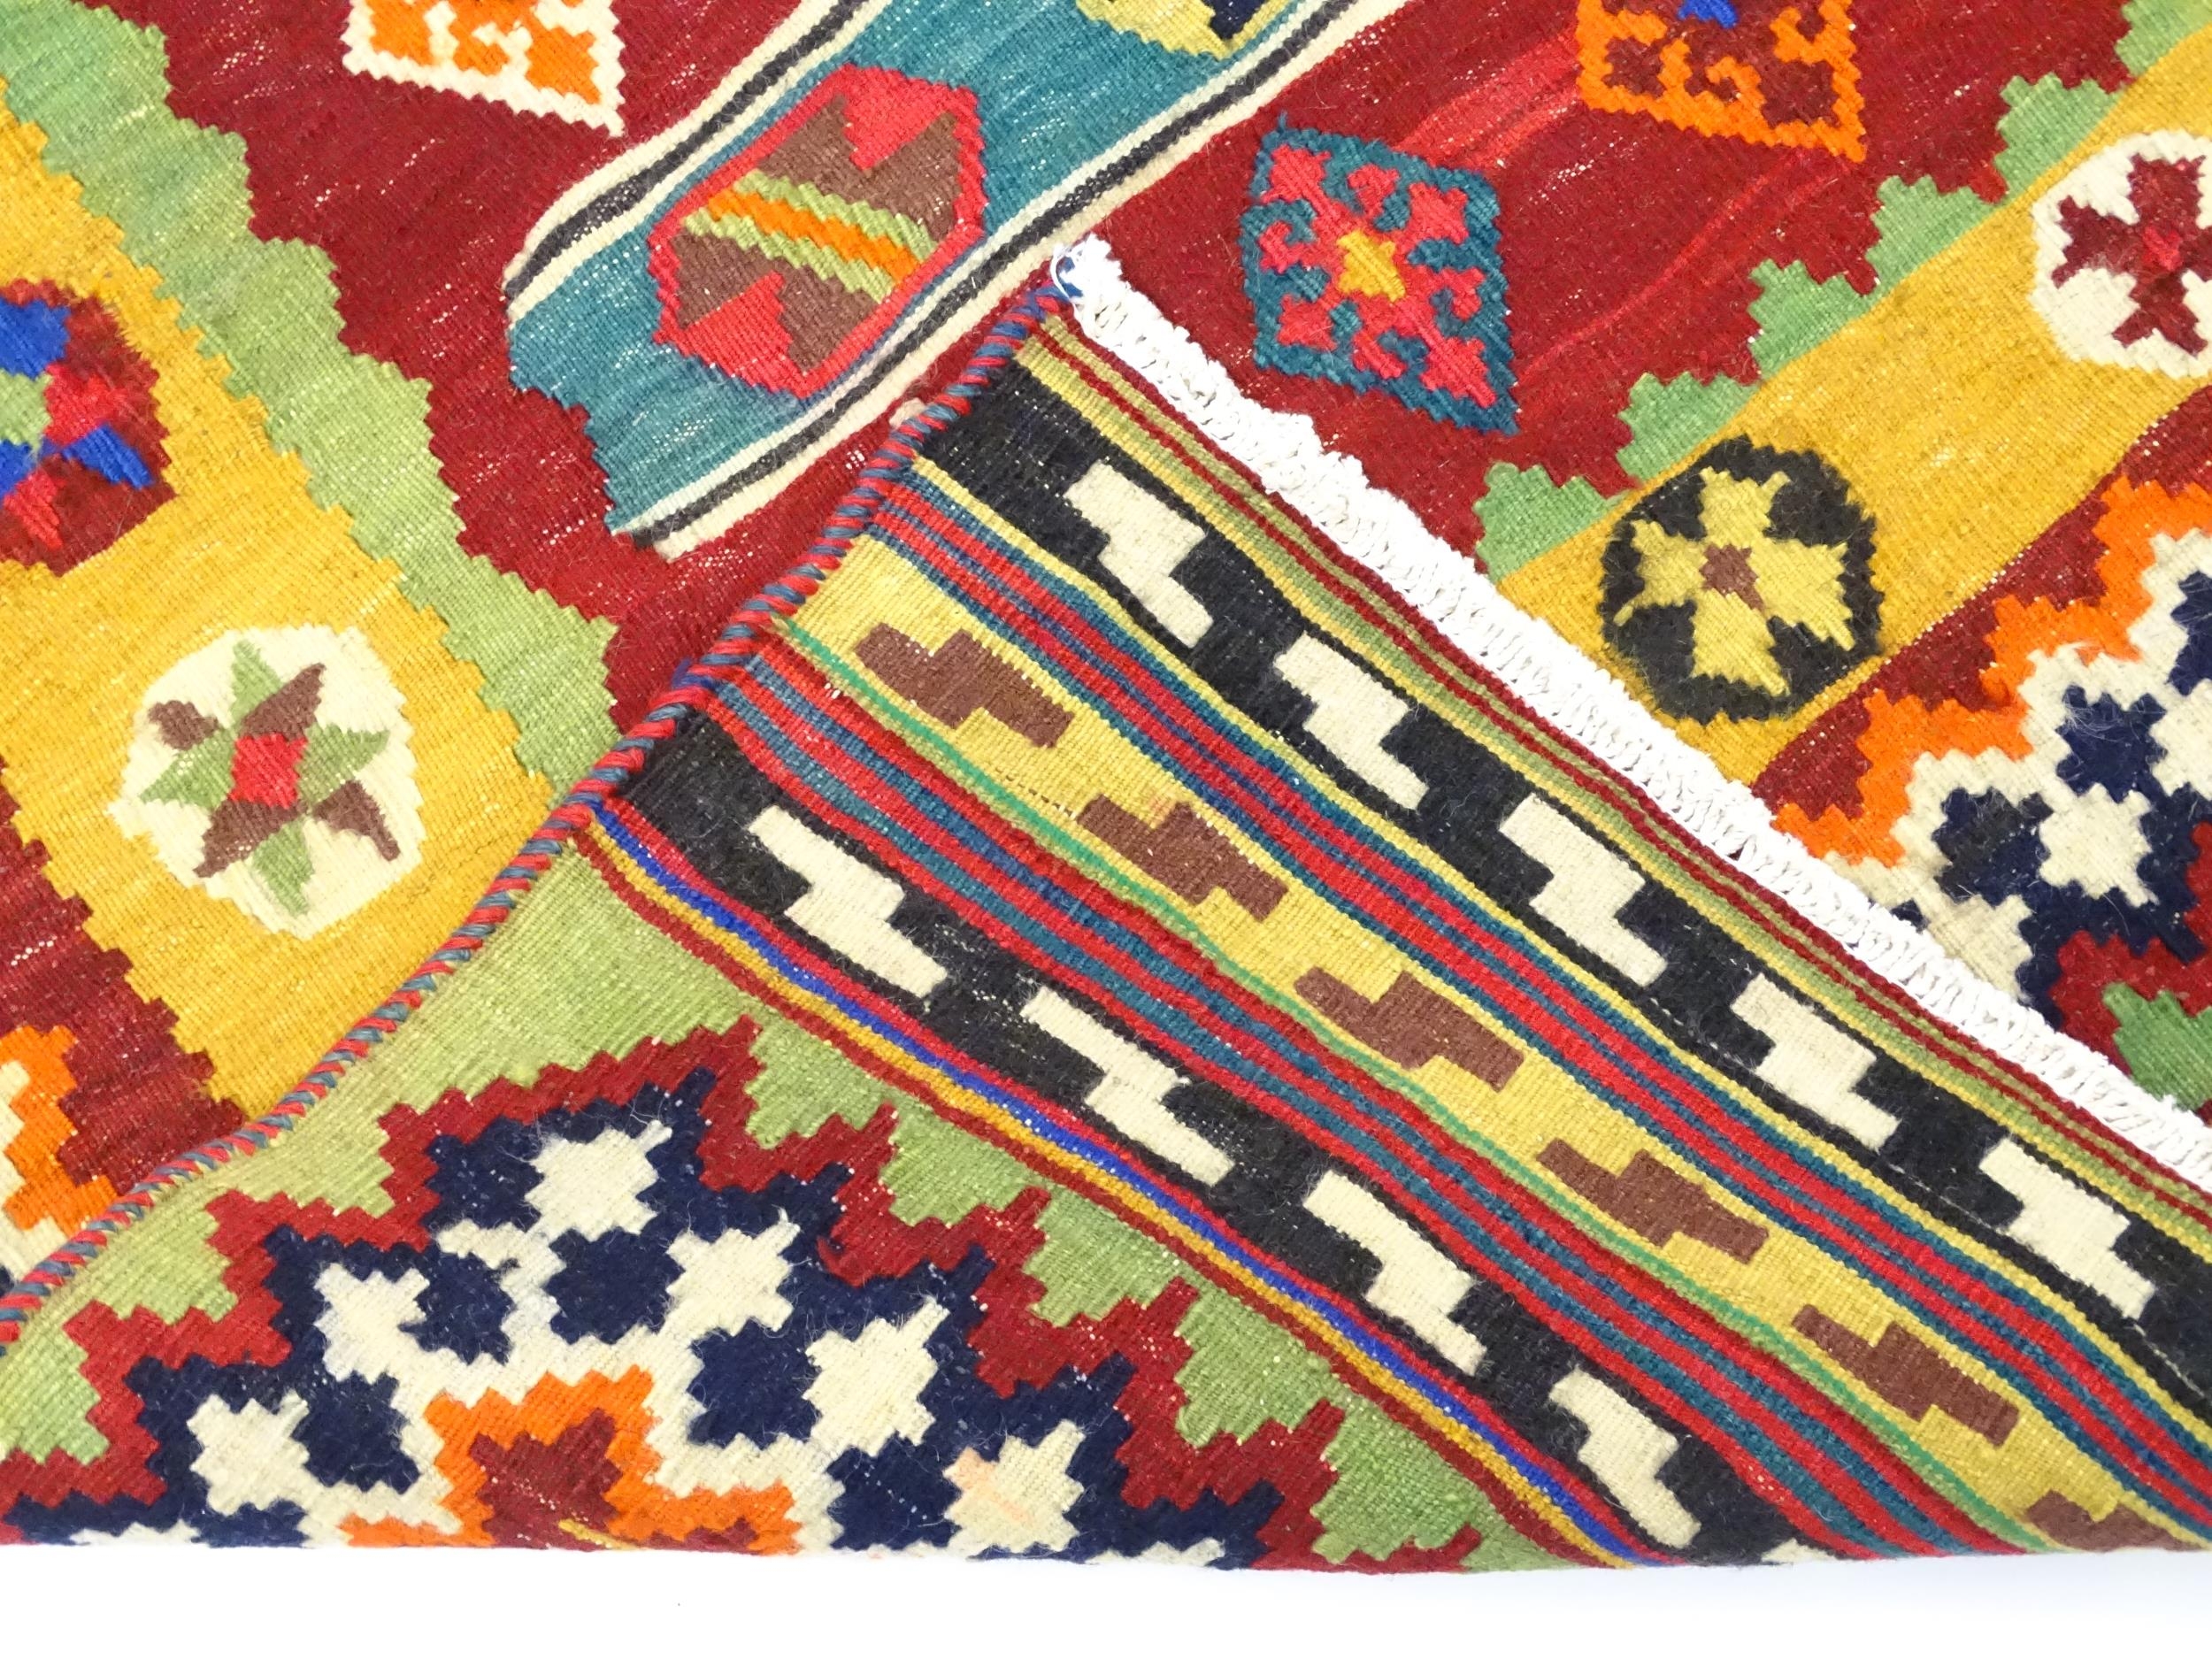 Carpet / Rug : A South West Persian qashgai kilim rug with banded geometric motifs and borders. - Image 2 of 9